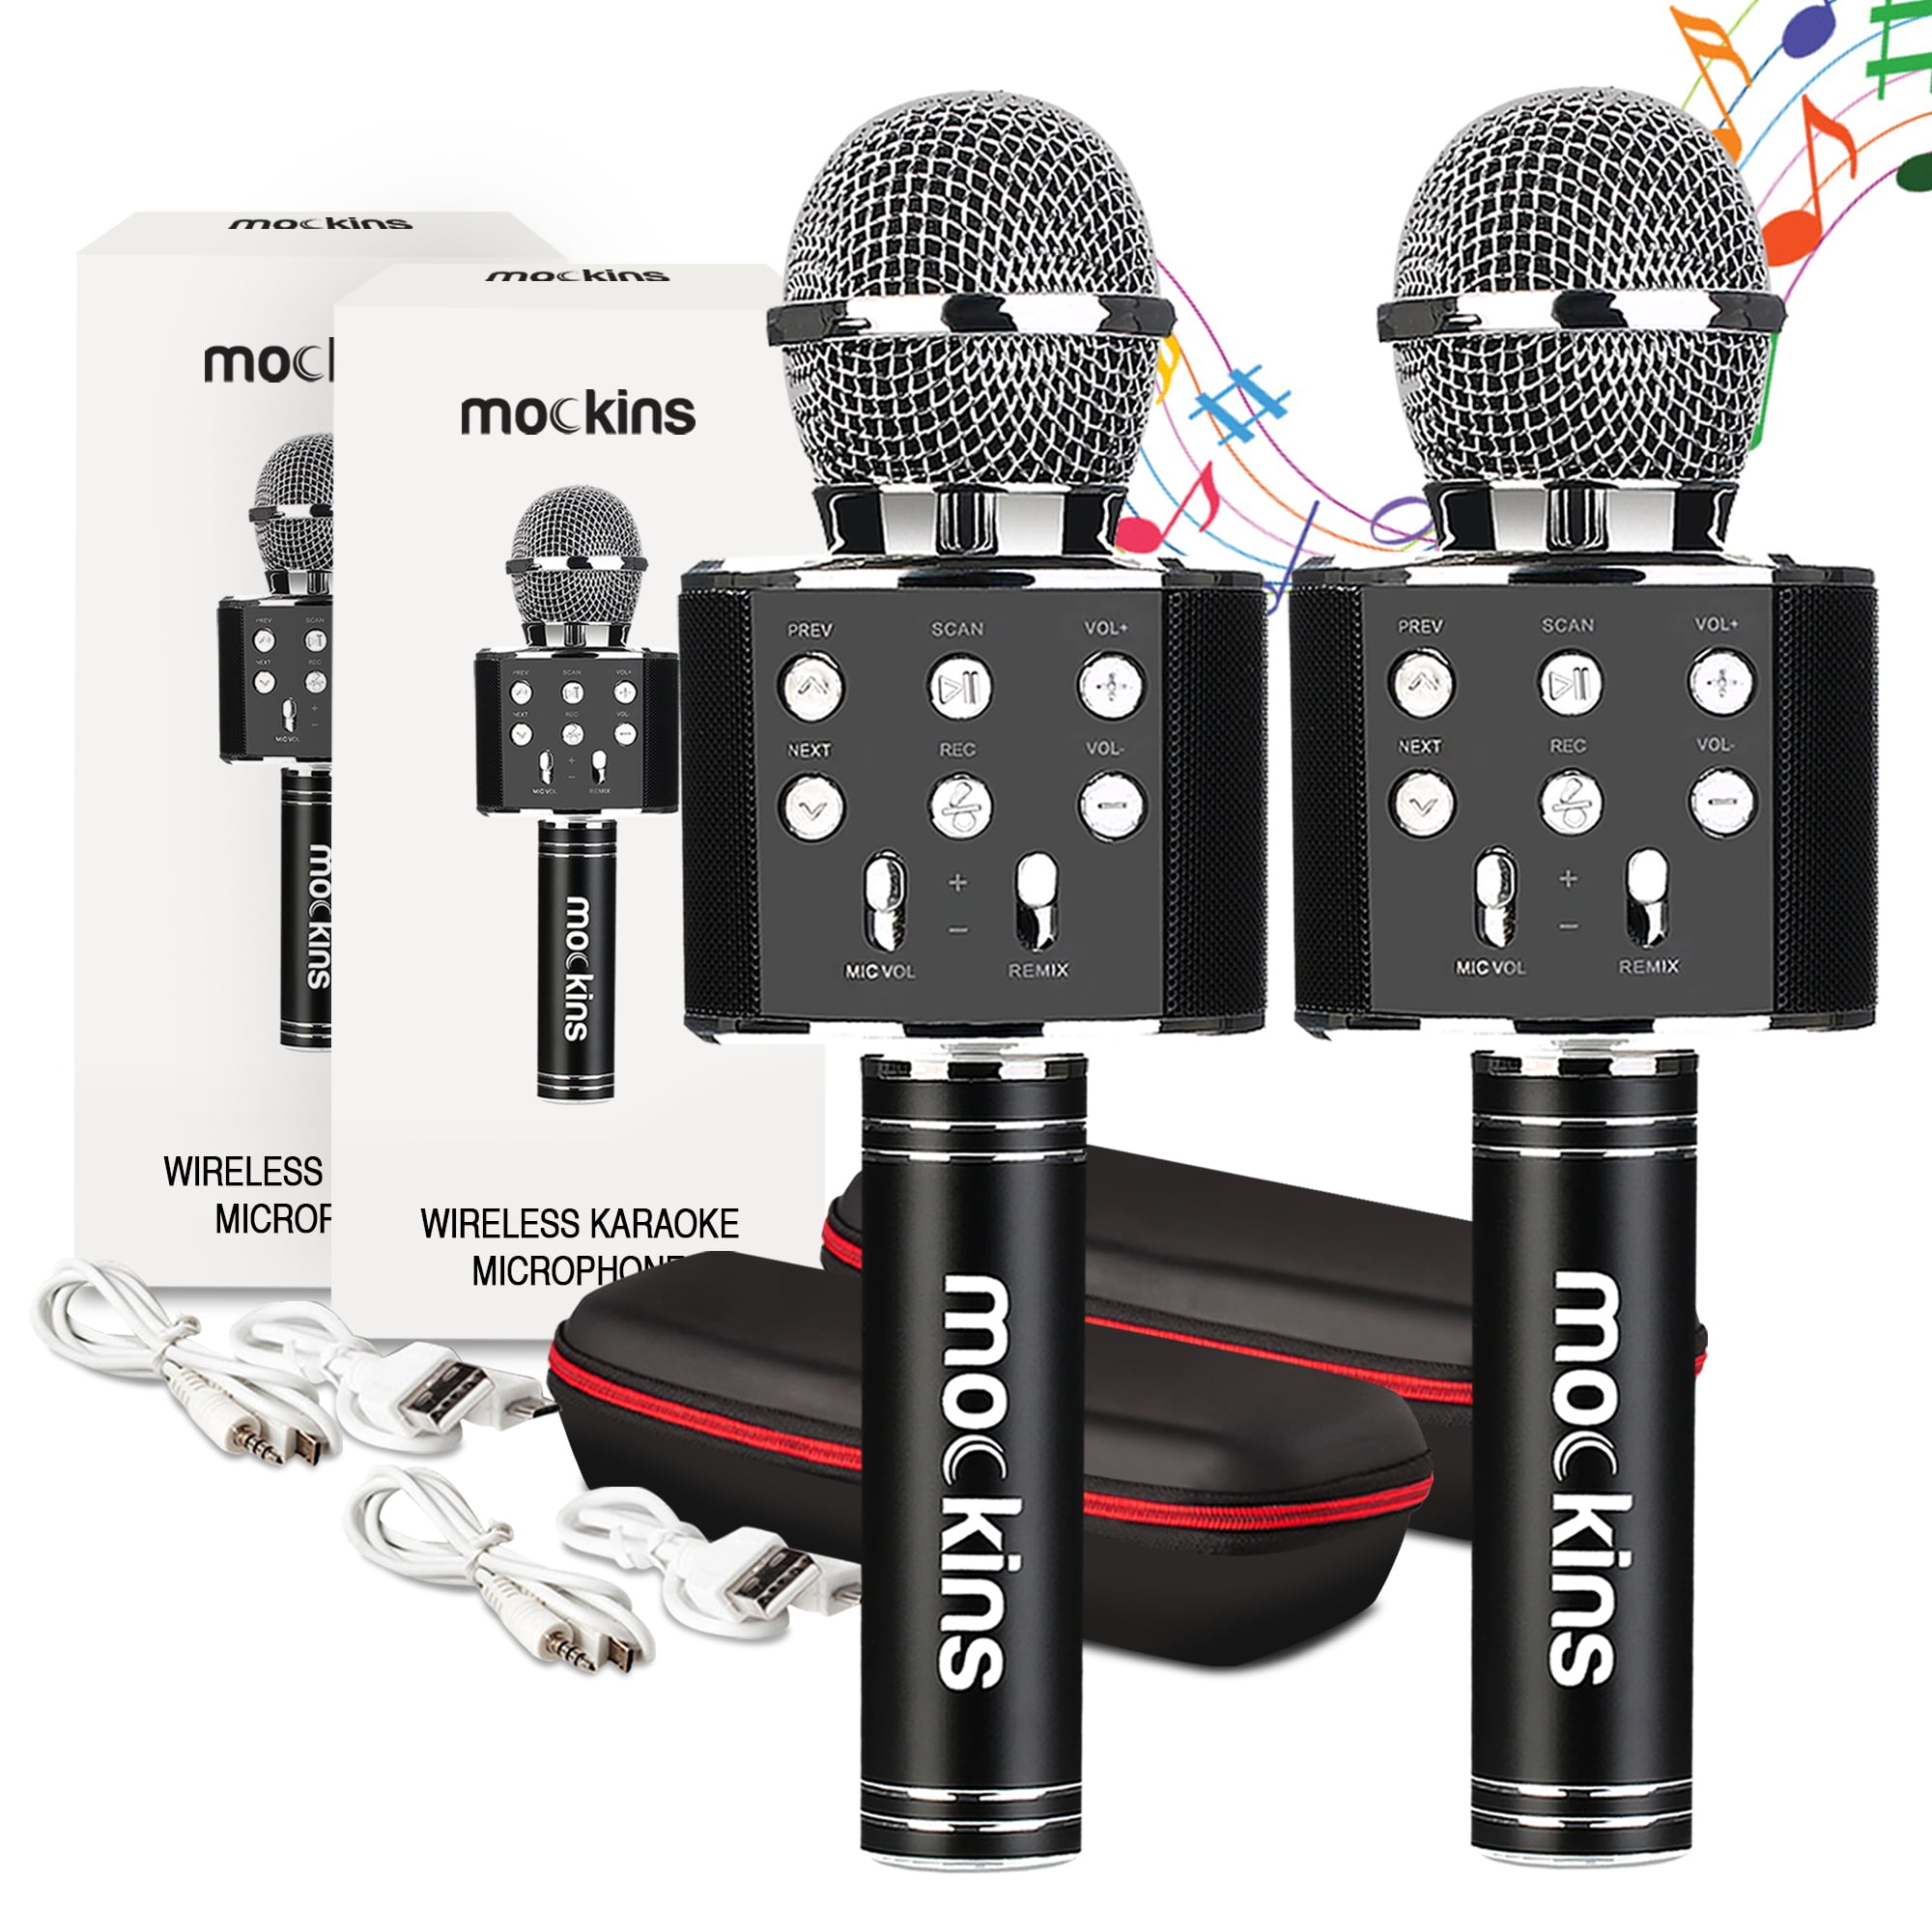 Microphone Compatible with Android & iOS iPhone Nevlers 2 Pack Black Wireless Bluetooth Karaoke Microphones with Built in Bluetooth Speaker All-in-One Karaoke Machine 